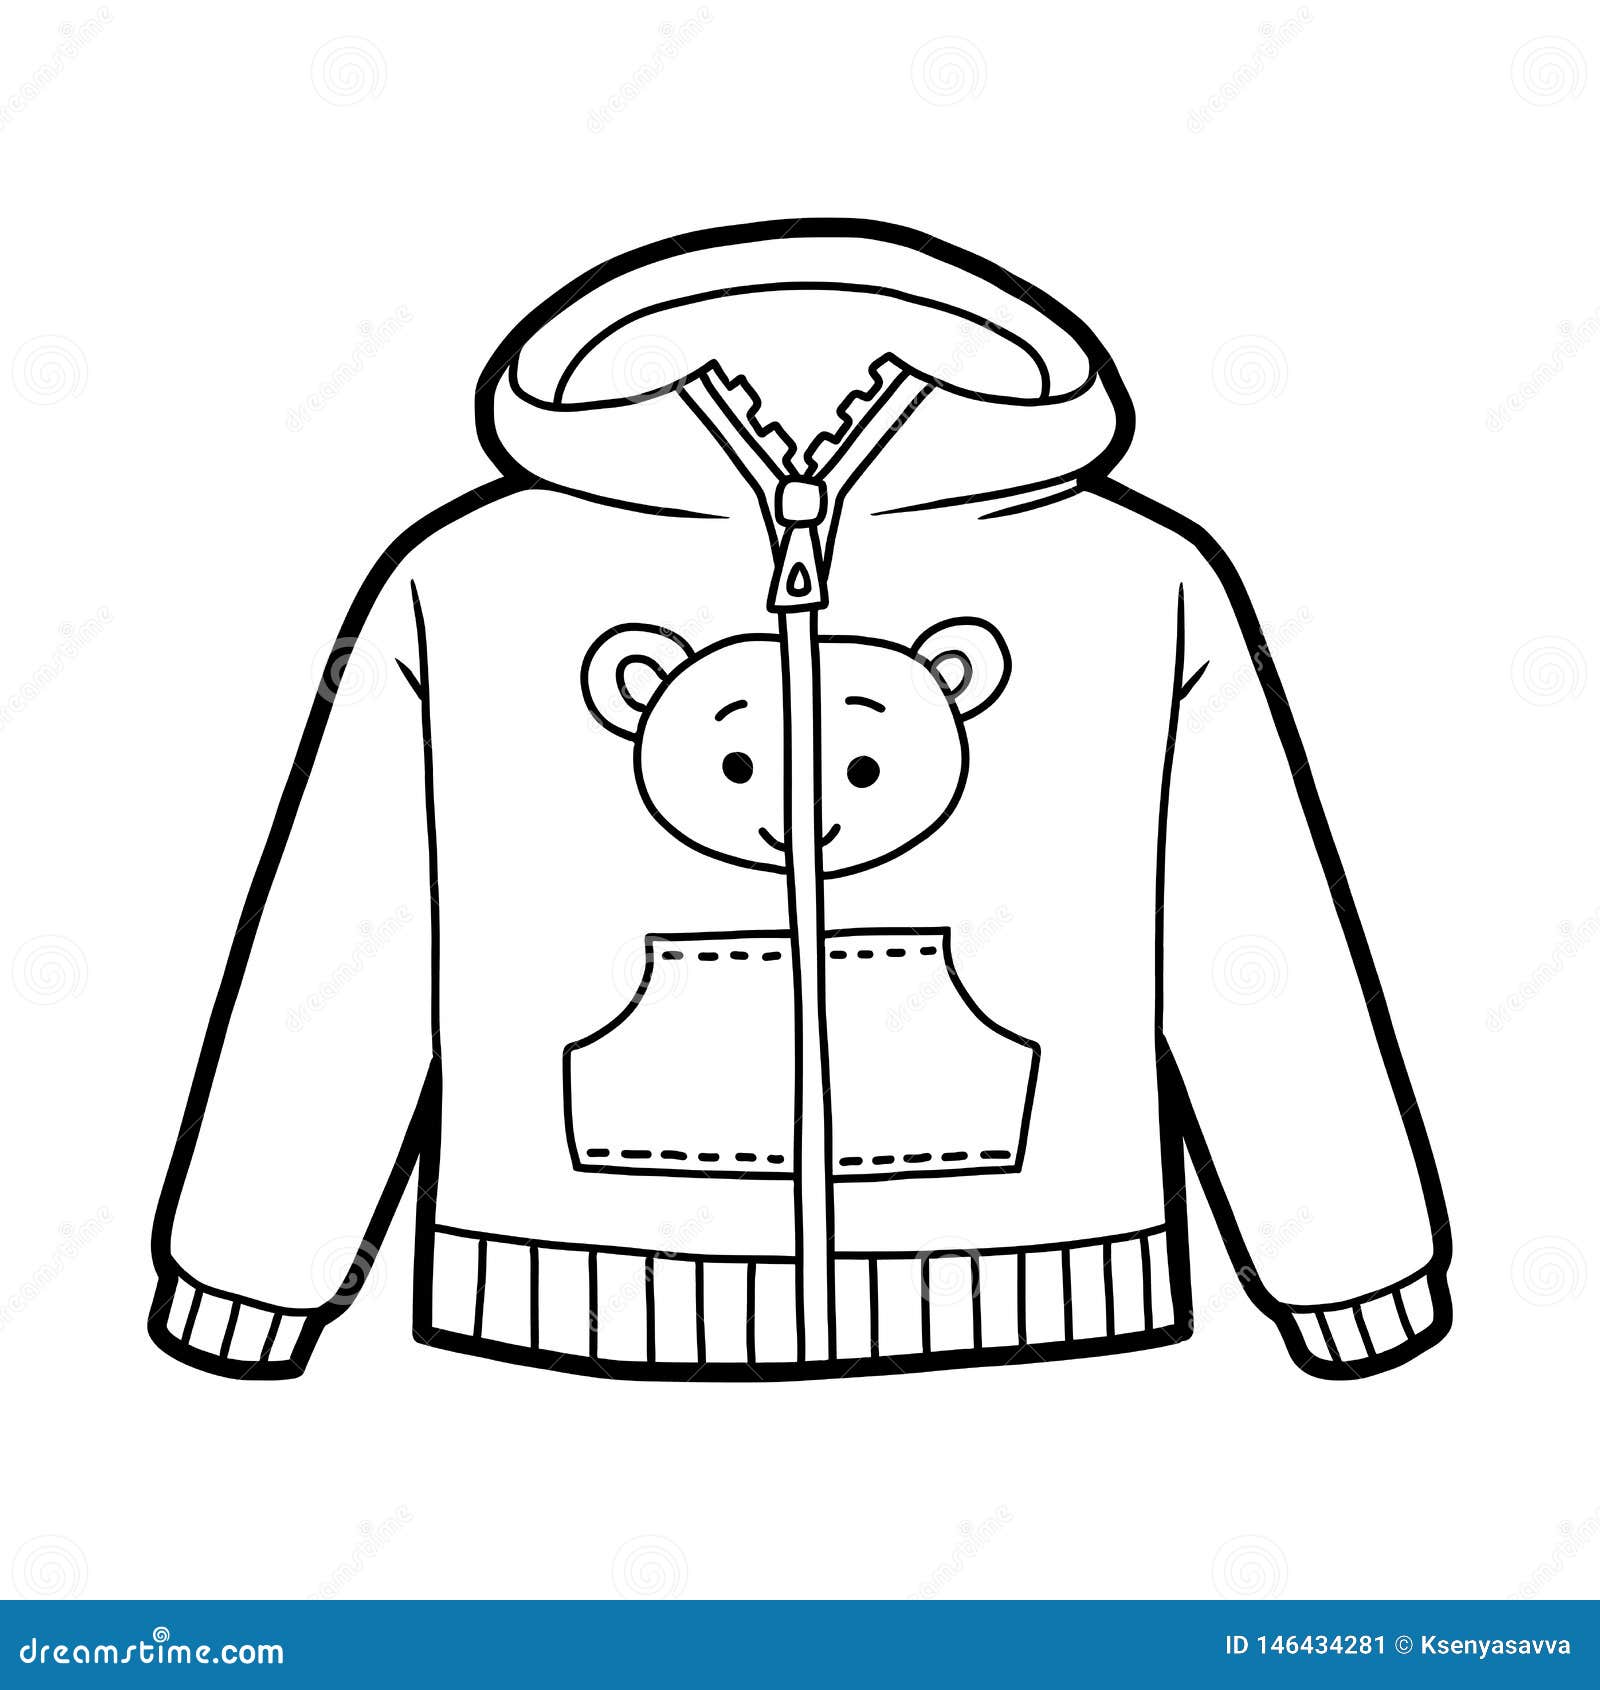 coloring book, hoody with a bear